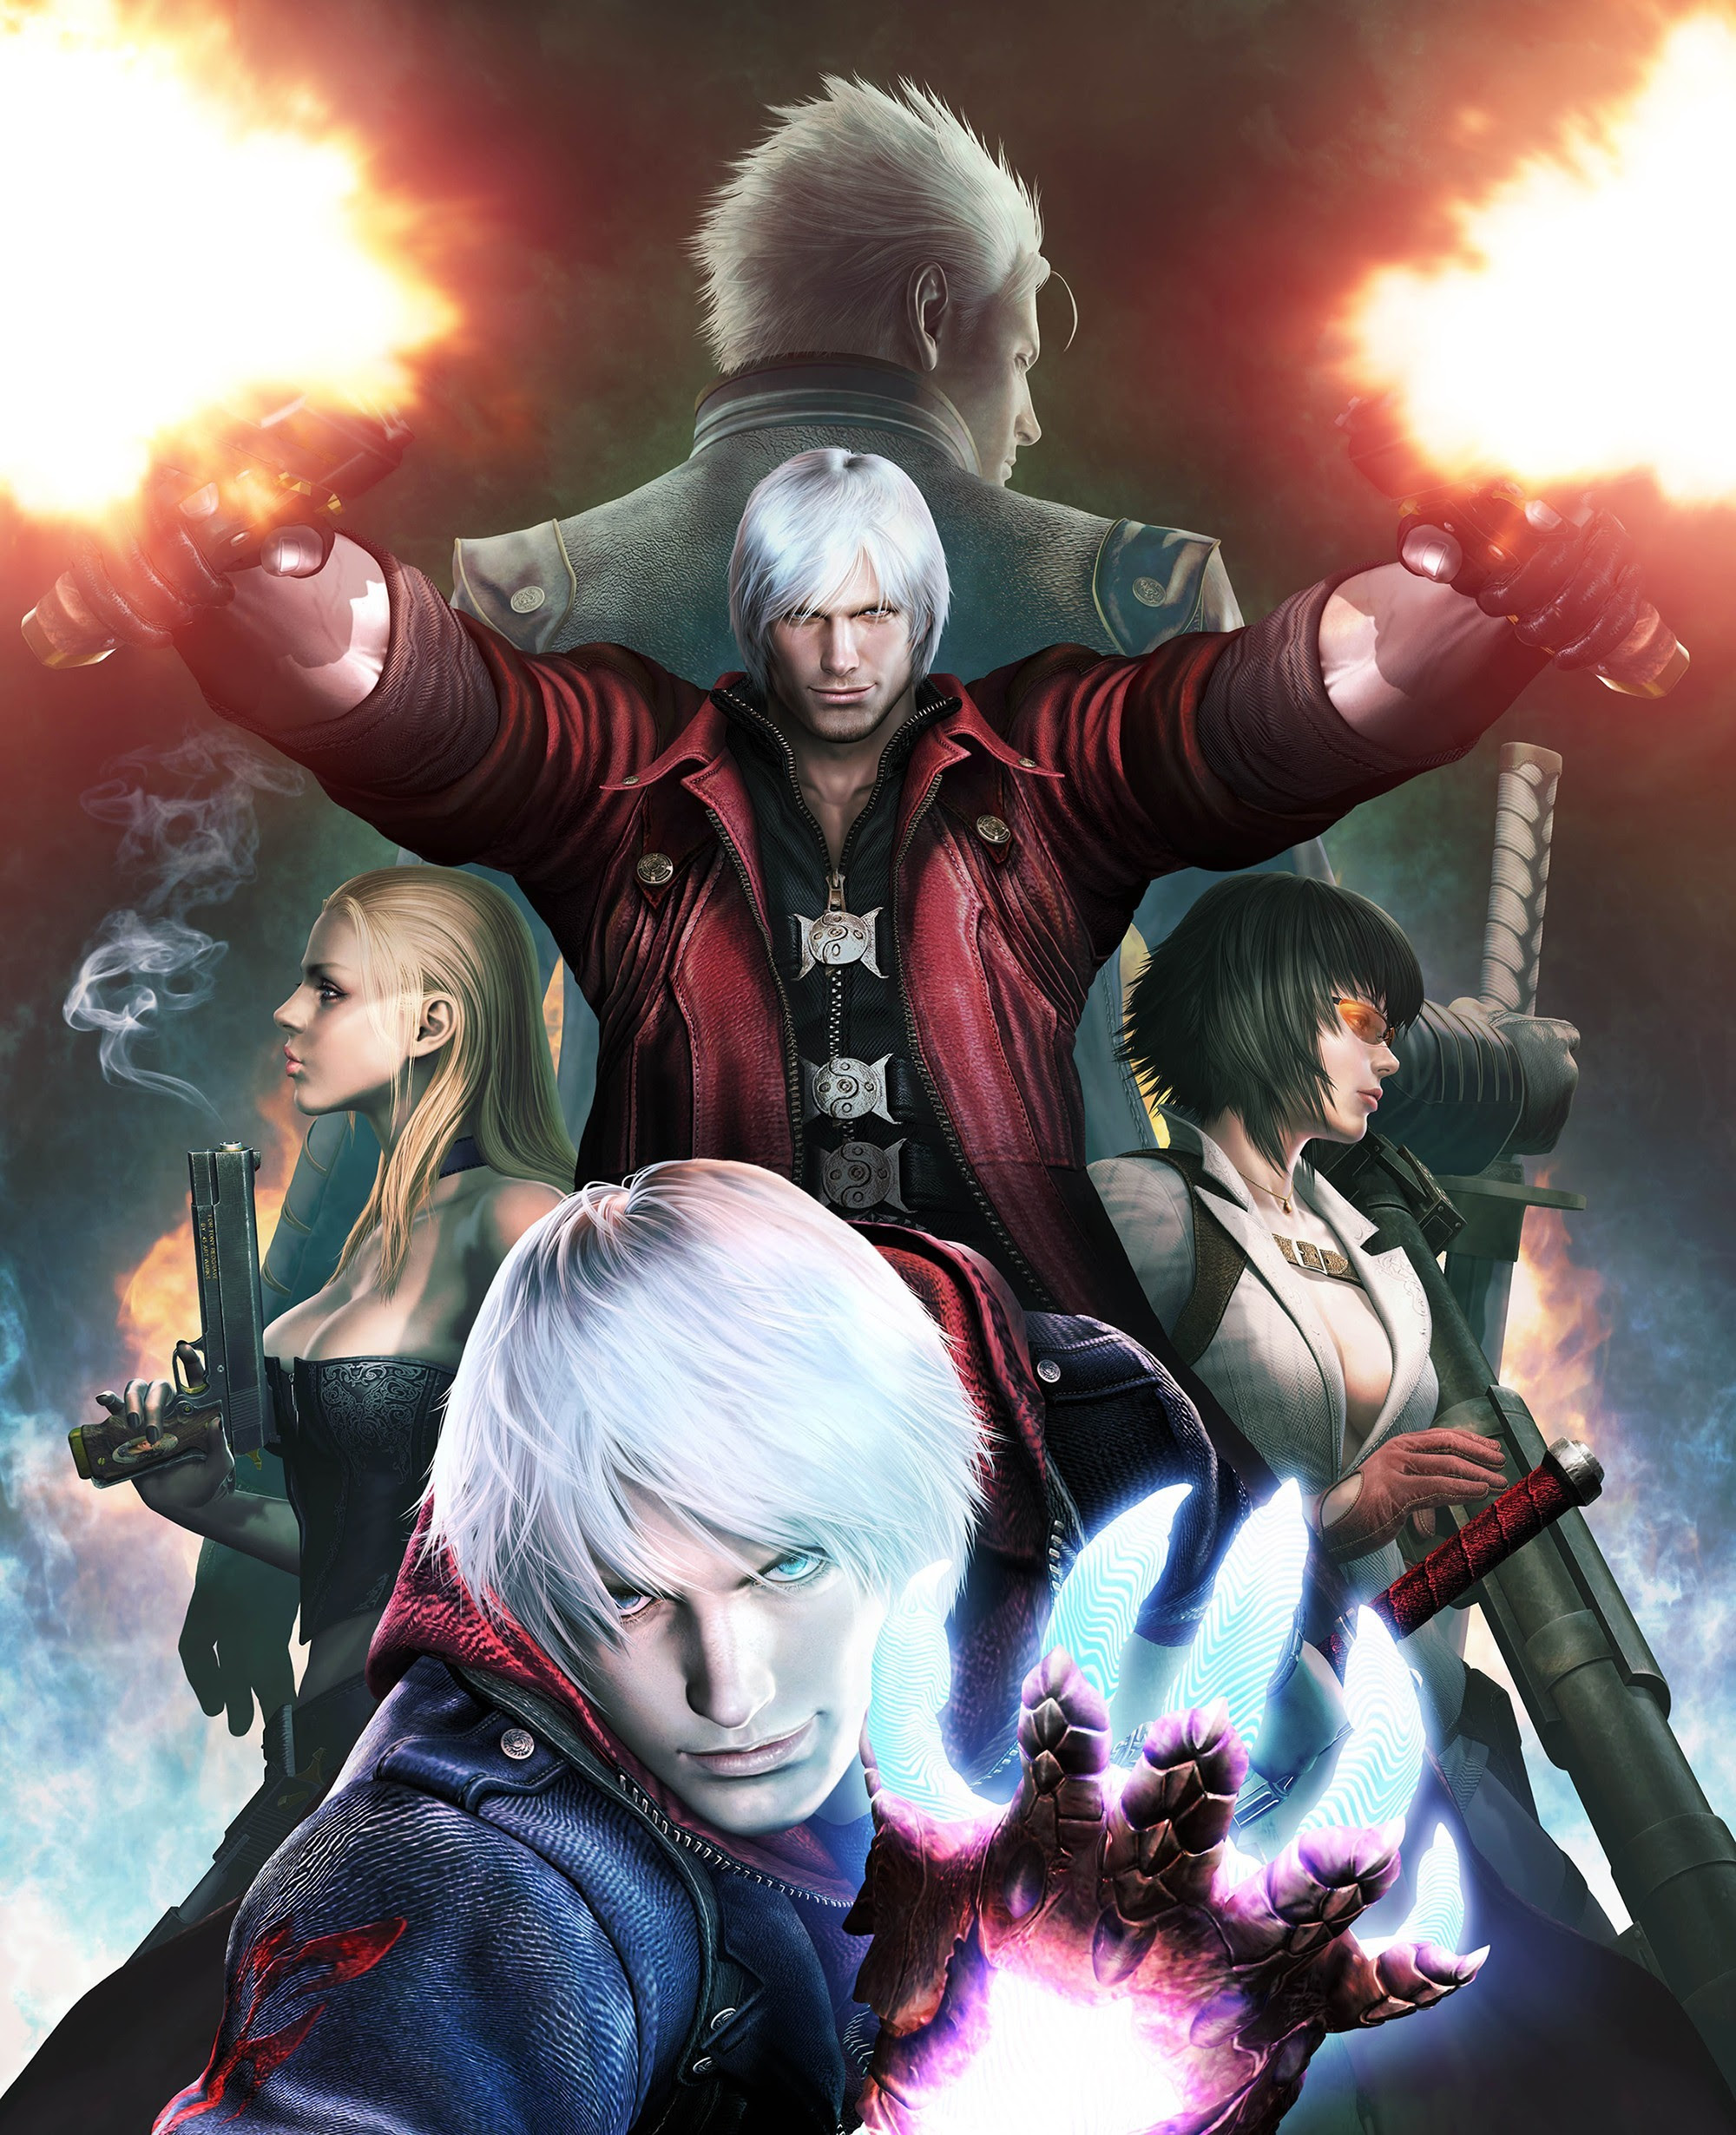 Devil May Cry Anime Wallpaper (65+ images)